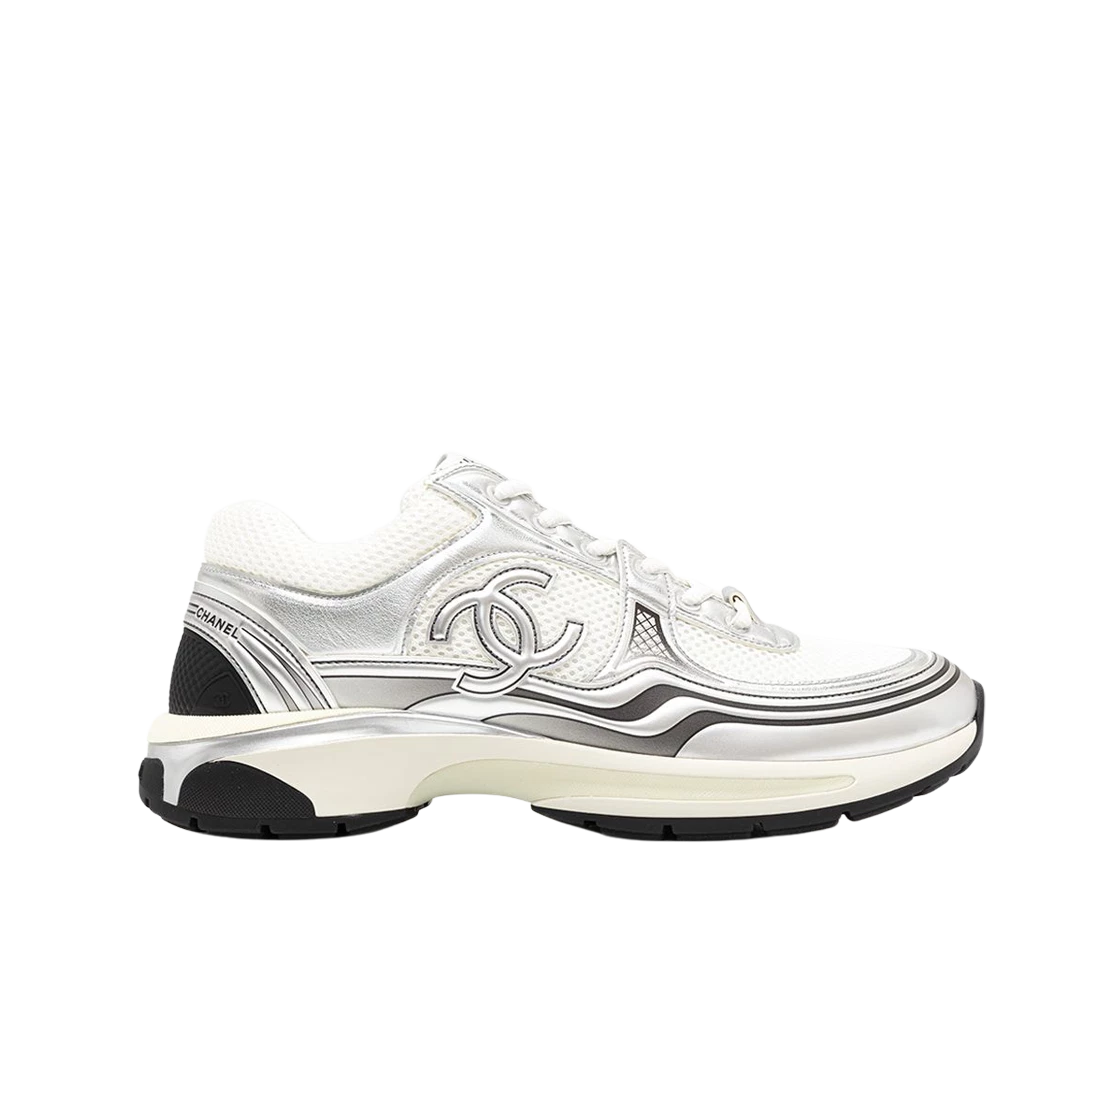 SASOM  รองเท้า Chanel Sneakers Fabric Laminated & White Silver